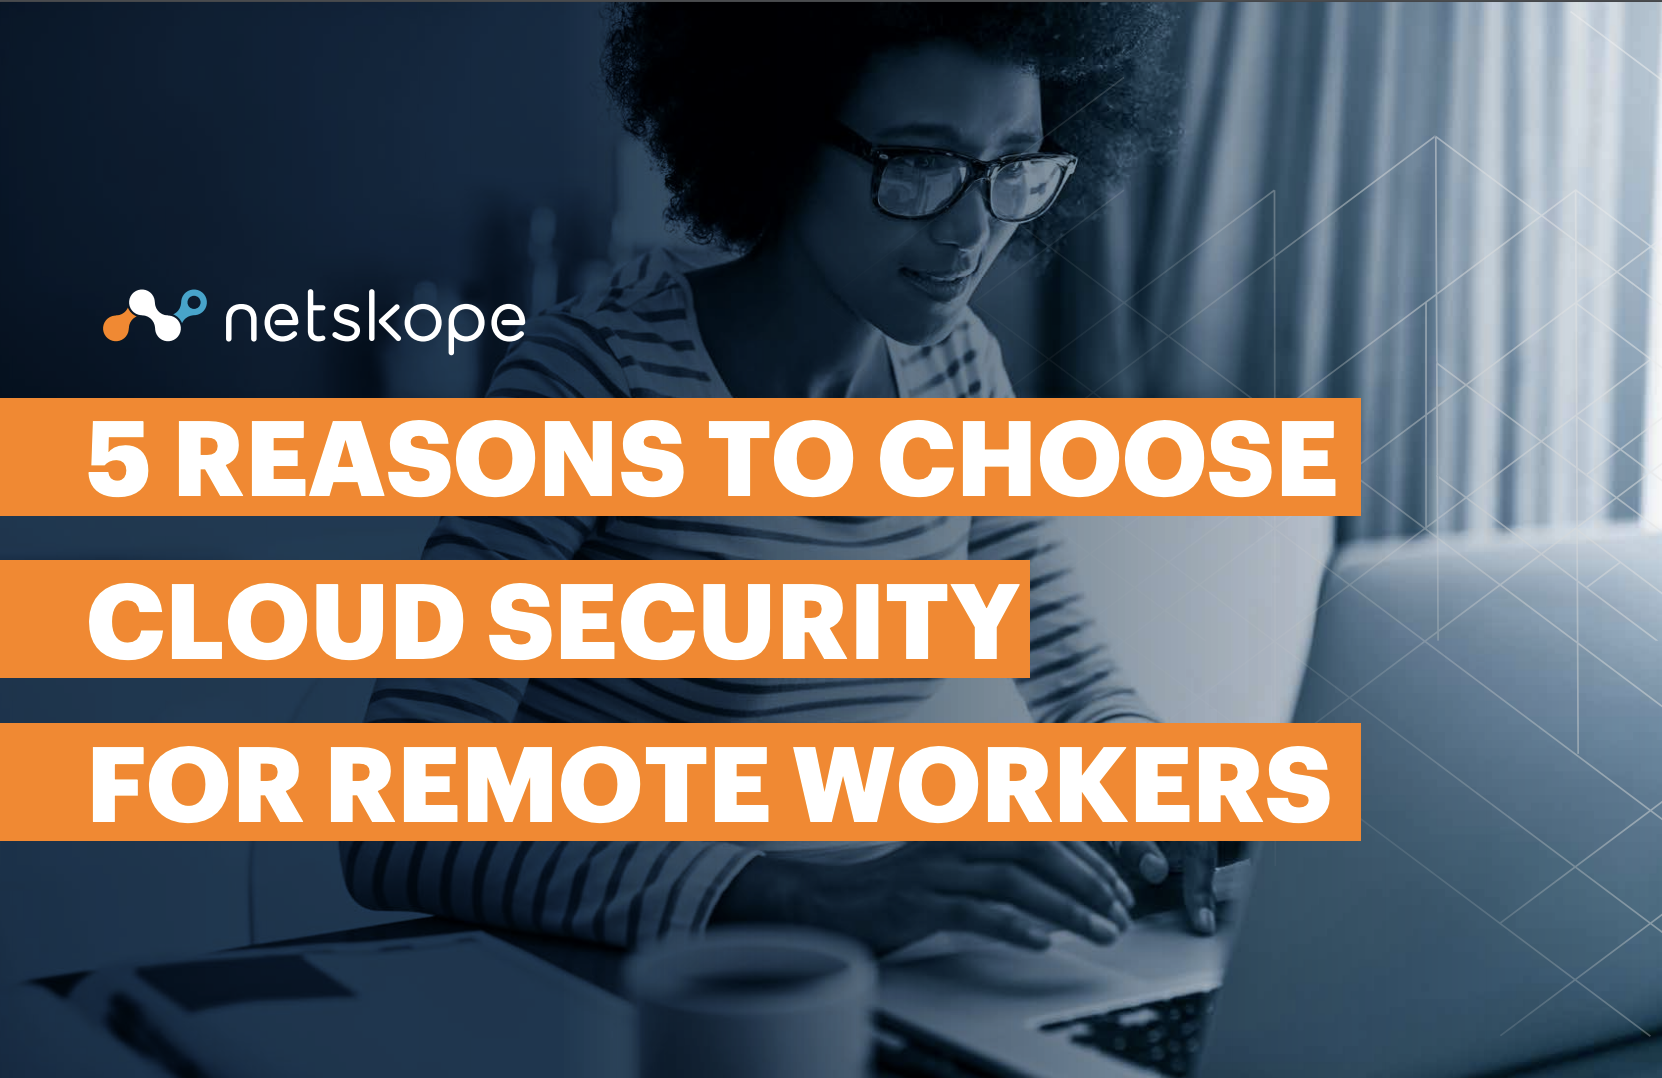 5 Reasons to choose cloud security for remote workers